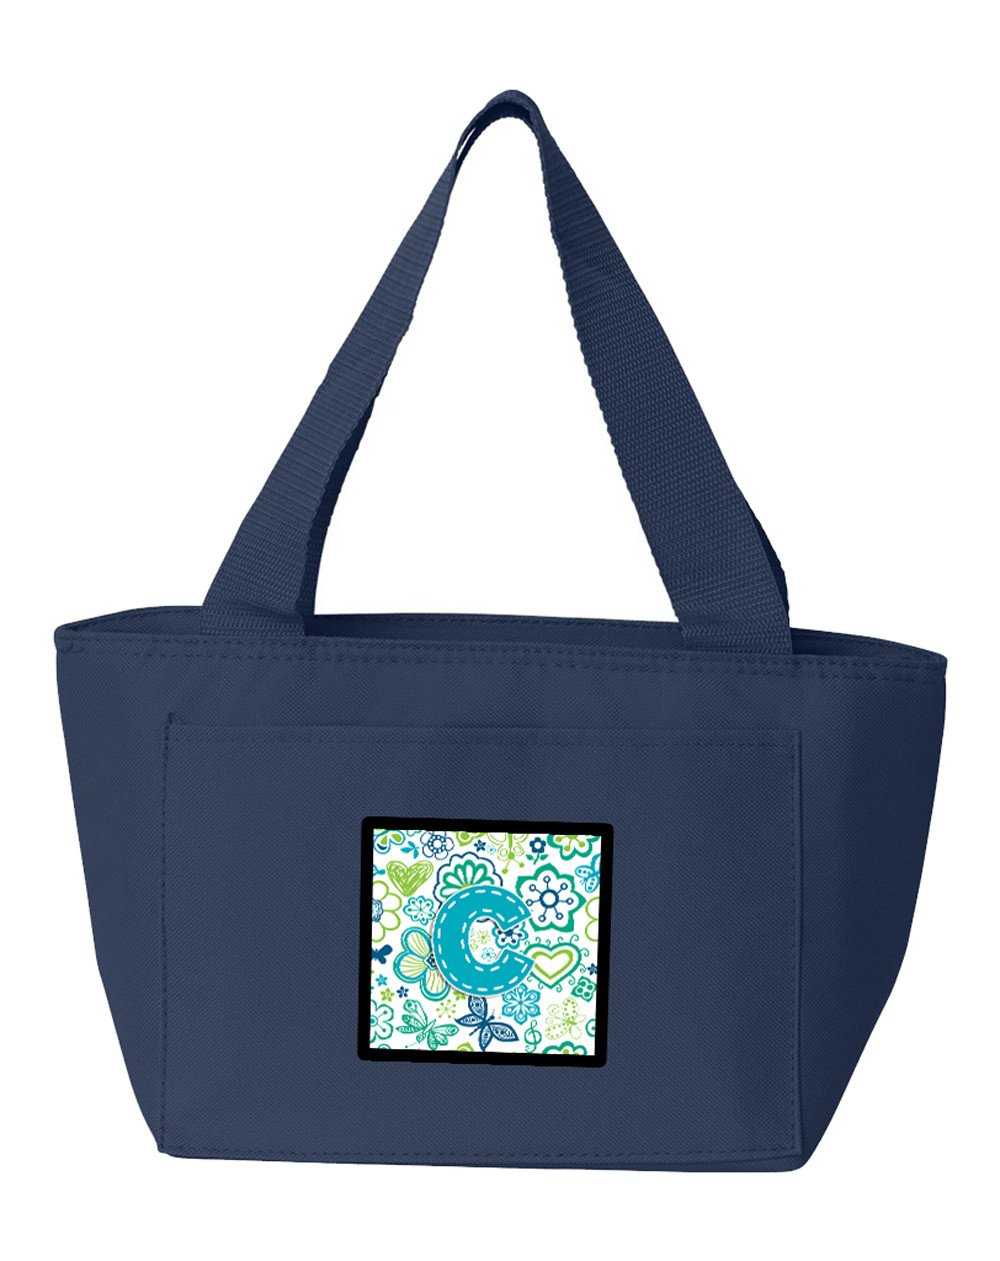 Letter C Flowers and Butterflies Teal Blue Lunch Bag CJ2006-CNA-8808 by Caroline's Treasures